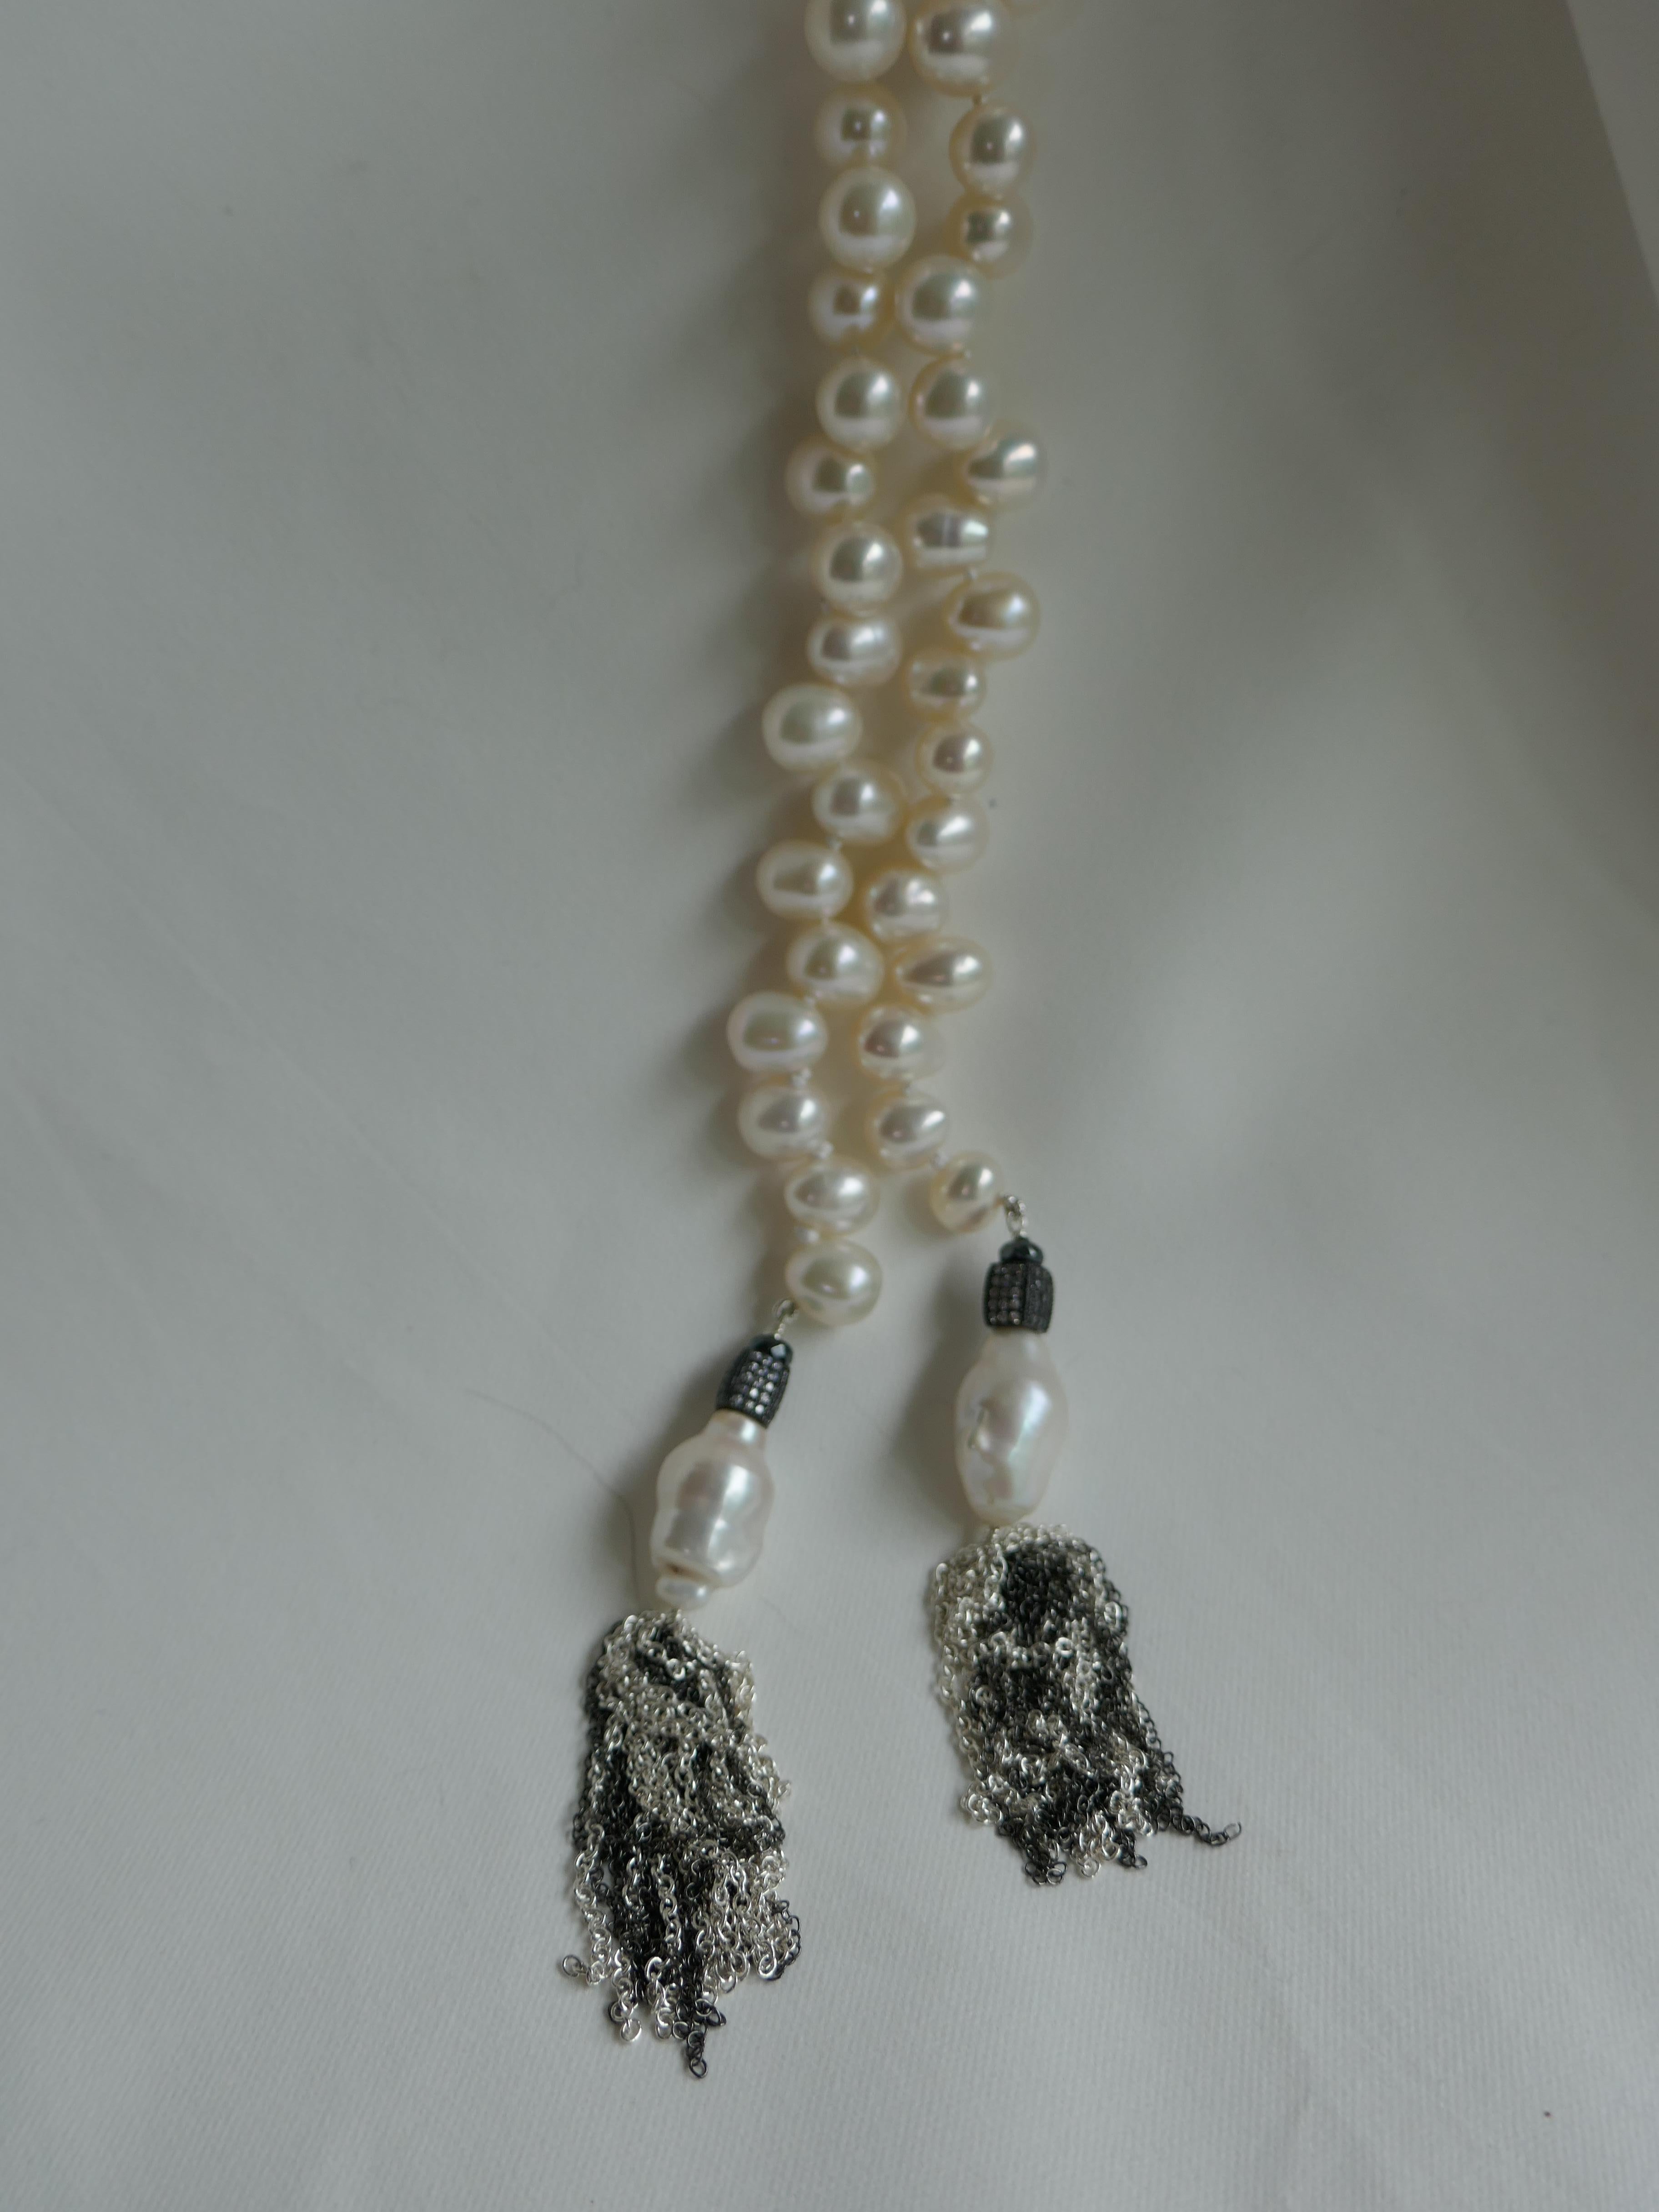 This is a very versatile necklace.Lariats are great , as they may be worn different ways, as well as layered with other necklaces in your collection. The pearls on this lariat are a nice size and have little blemishes and great luster. These pearls